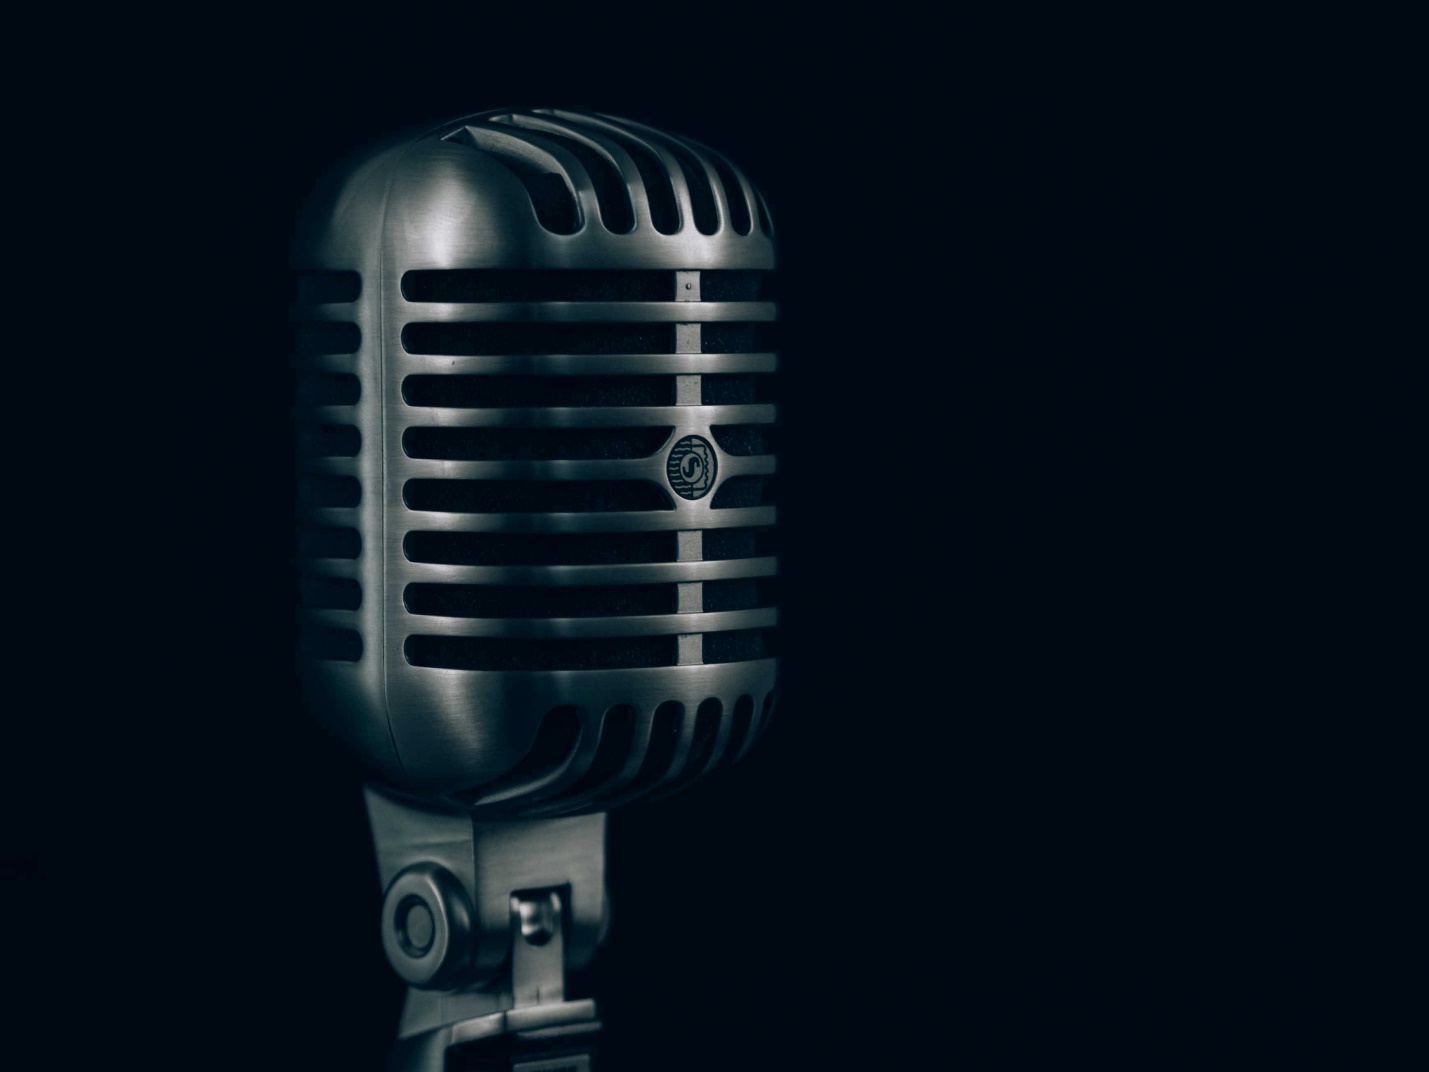 A close up of a microphone

Description automatically generated